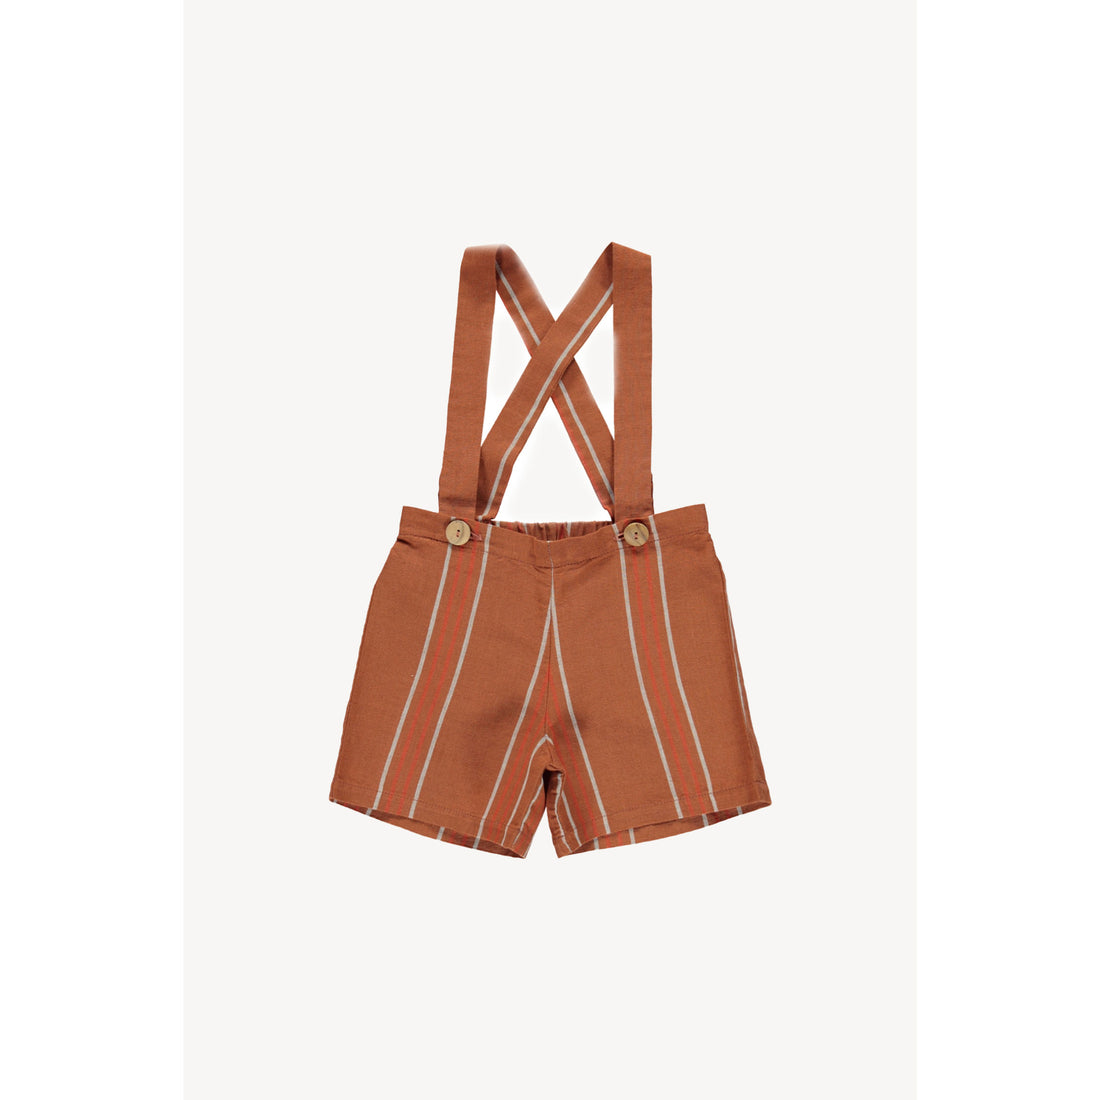 Fin and Vince Rust Stripe Suspender Shorts